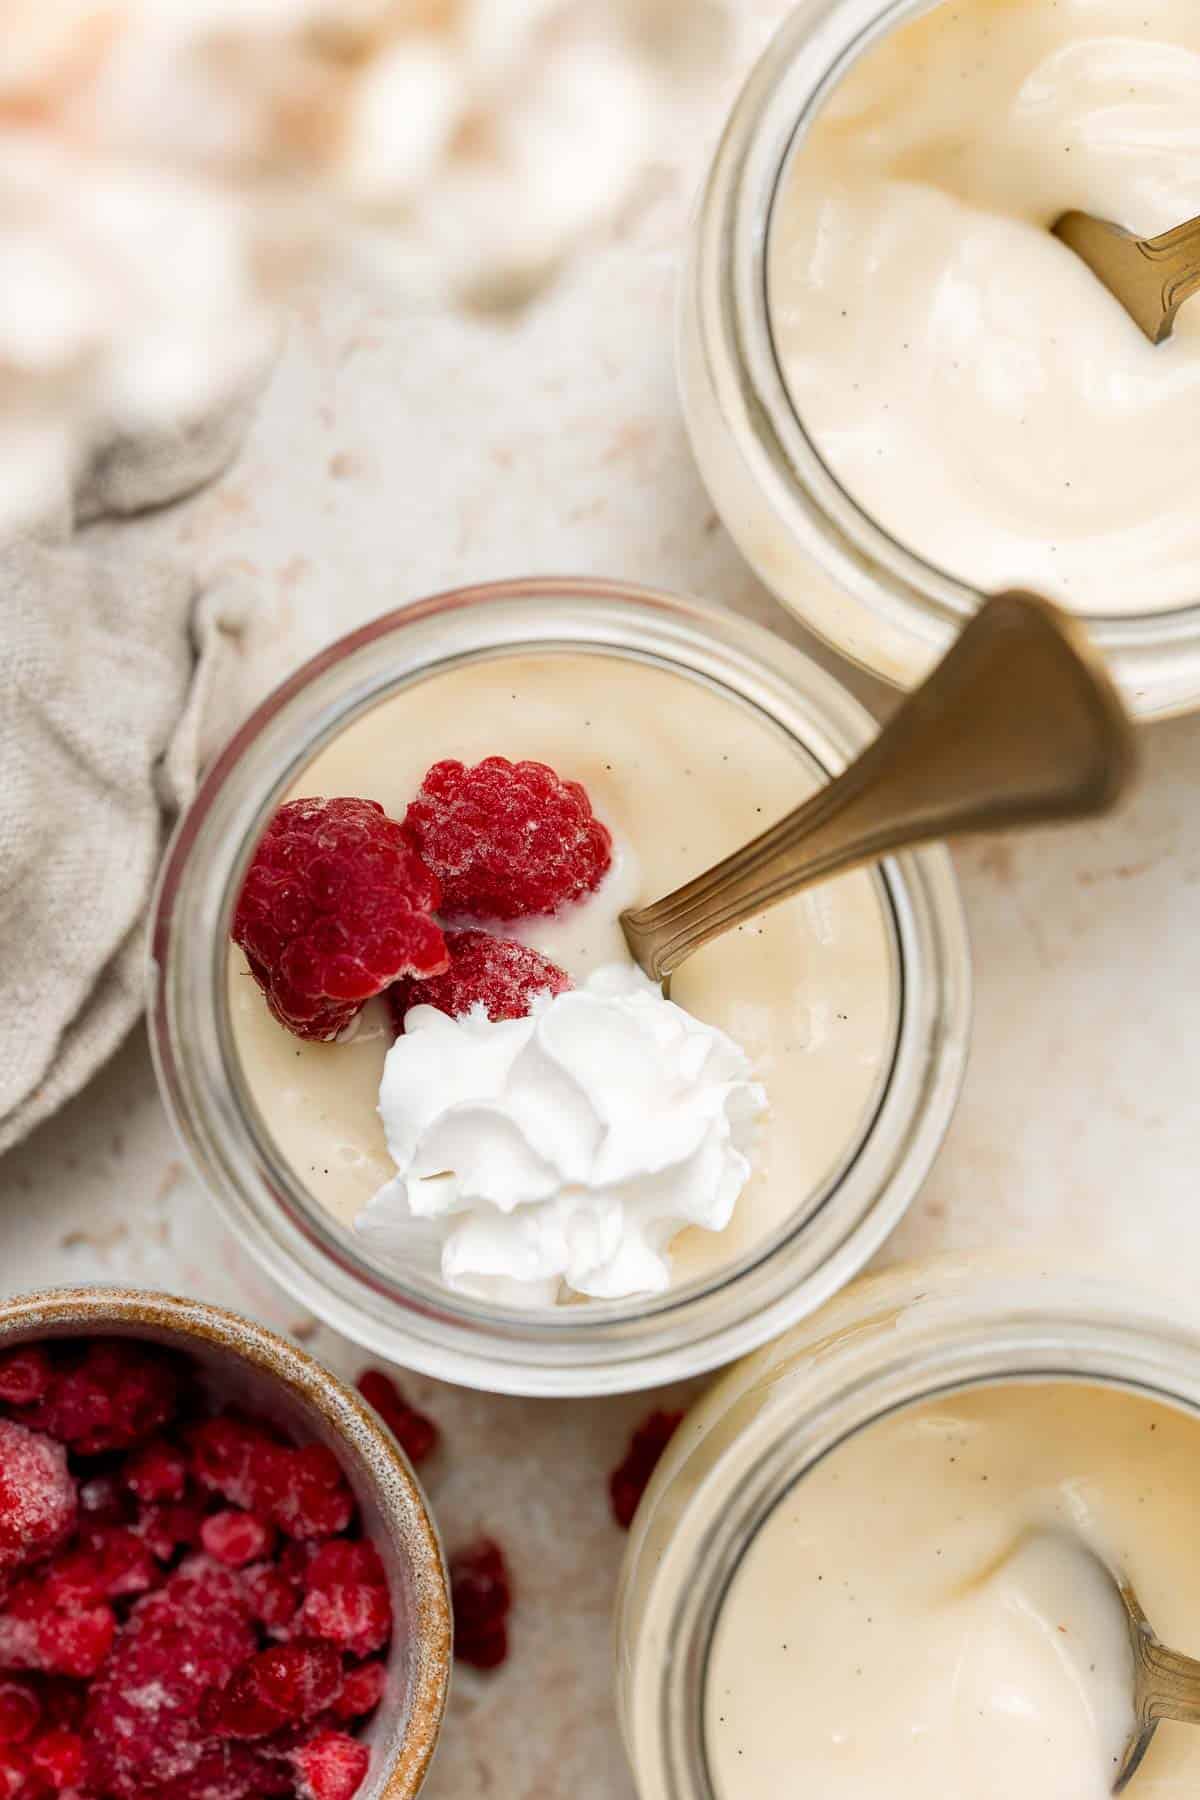 Homemade vanilla pudding is a creamy no bake dessert that you can make with 7 simple ingredients. So much better than boxed pudding mixes or pudding cups. | aheadofthyme.com